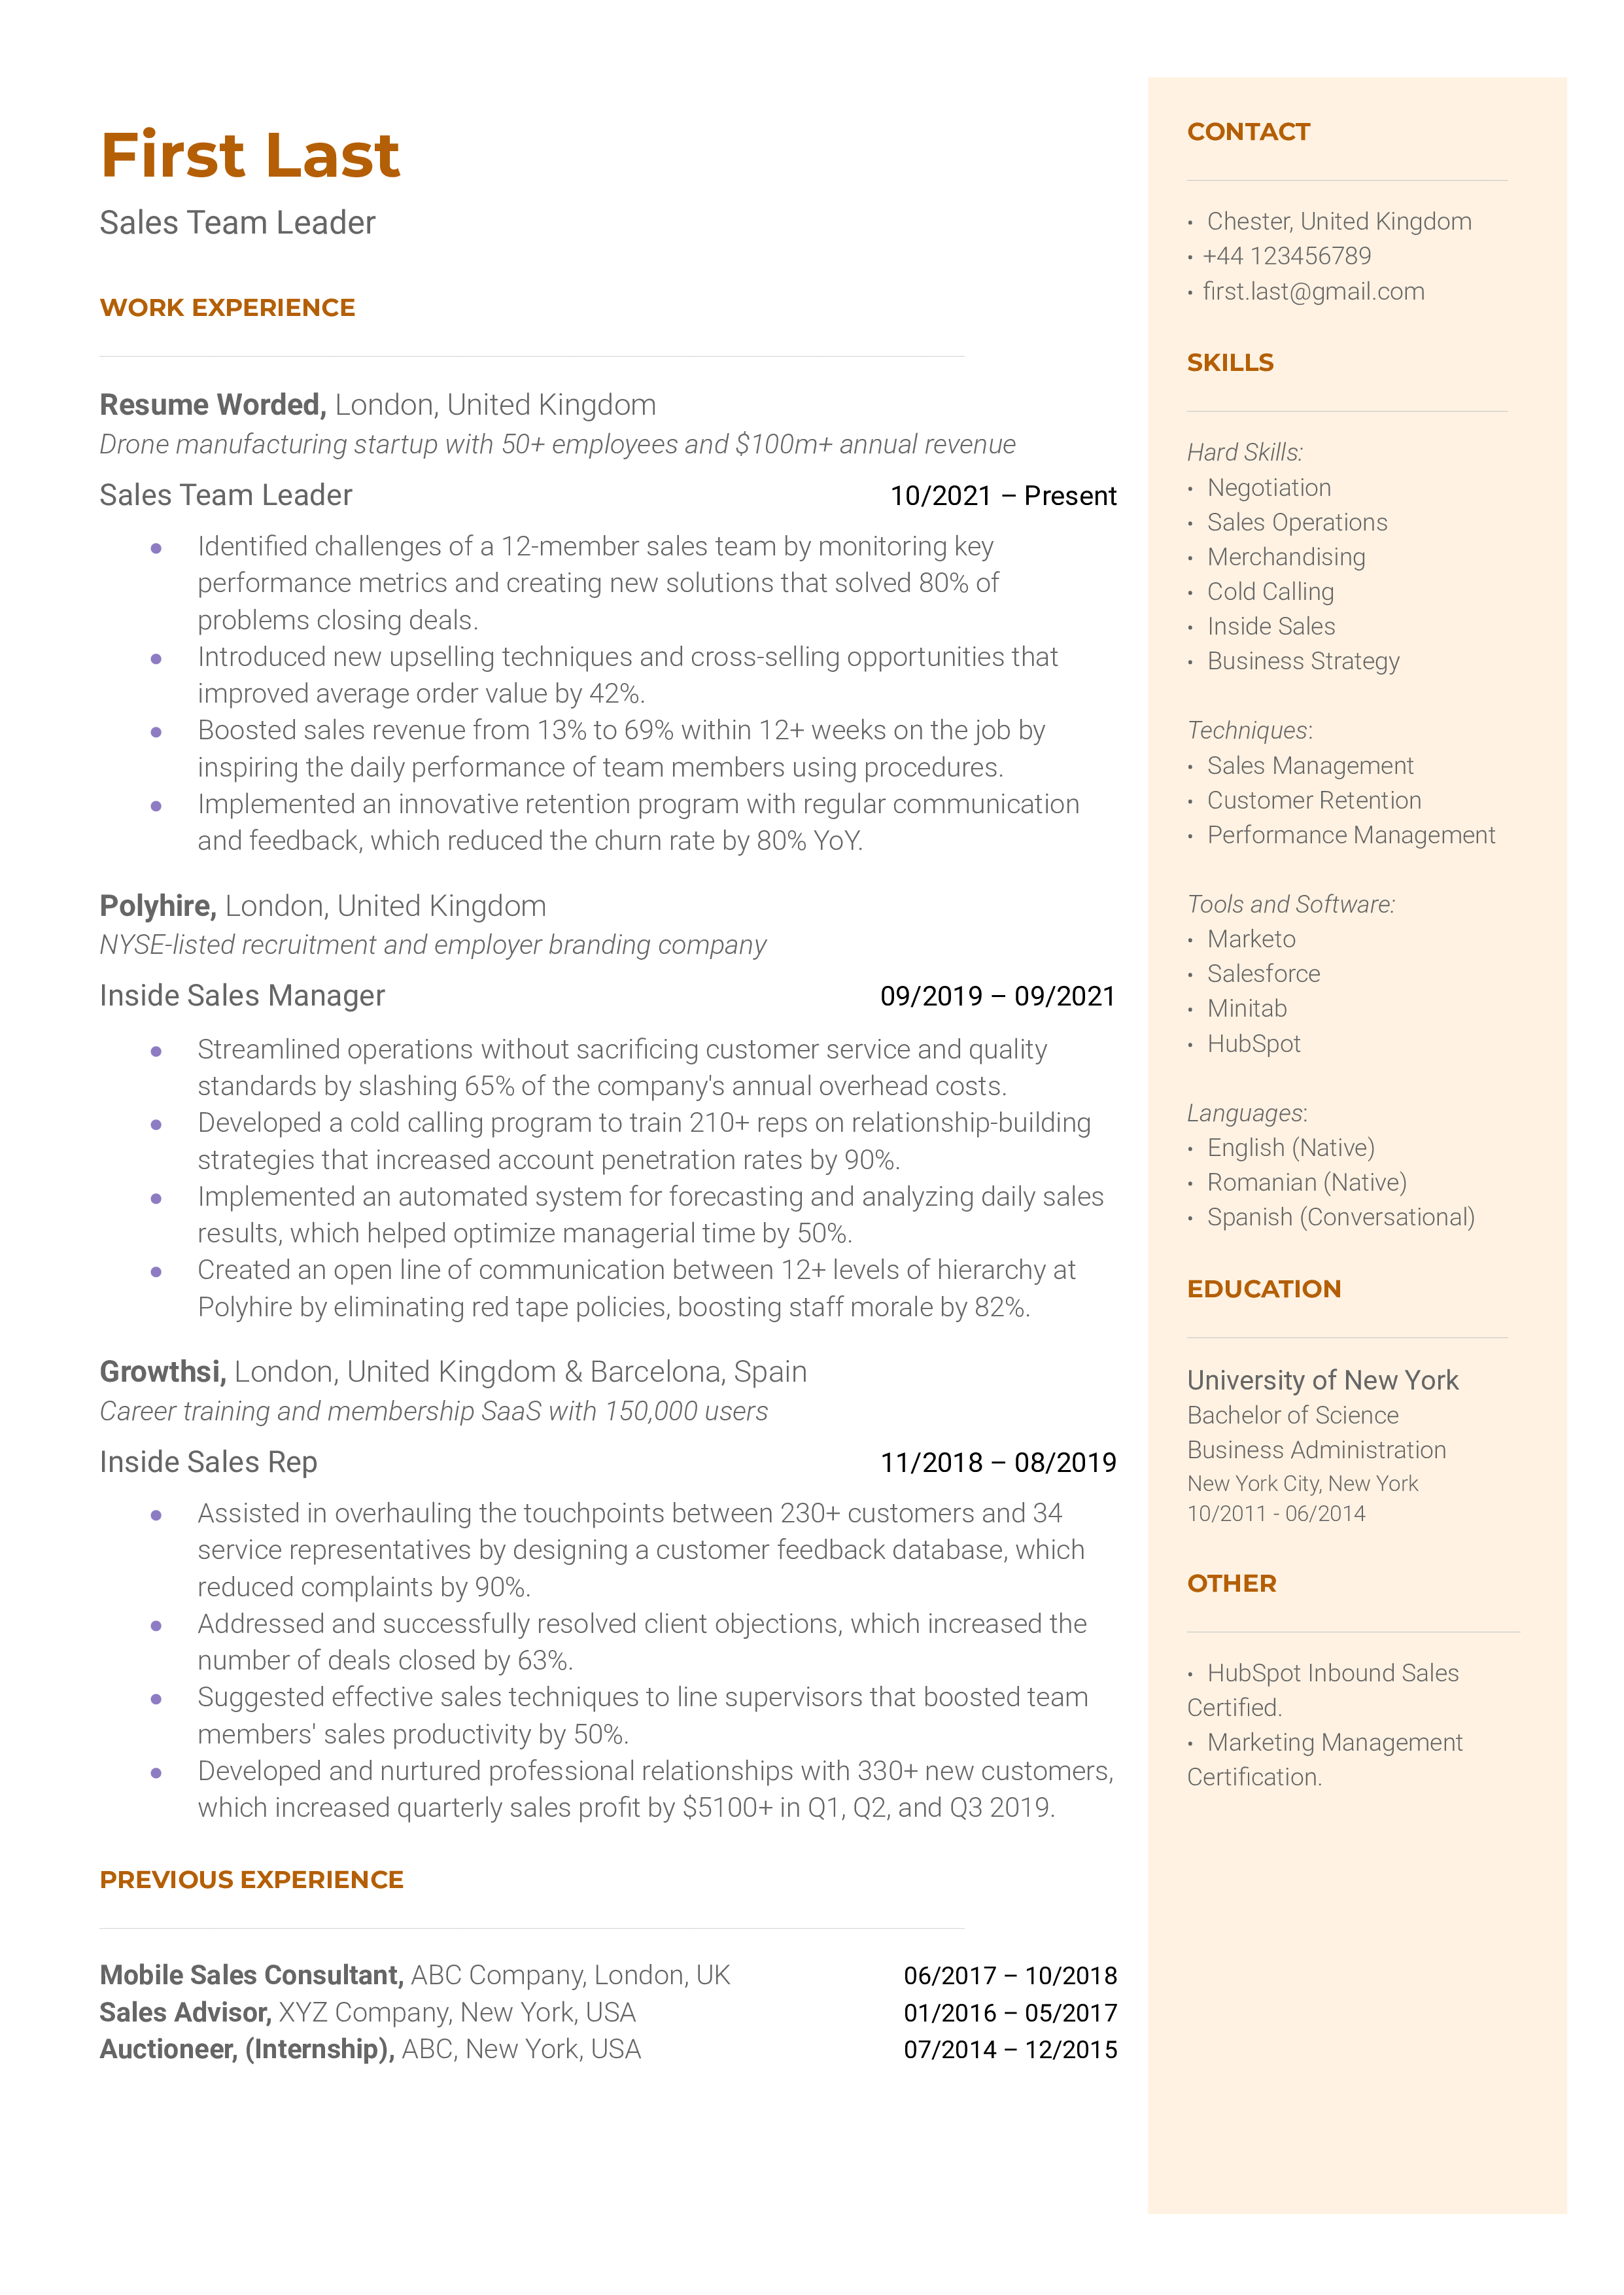 A sales team leader resume template that includes relevant certifications. 